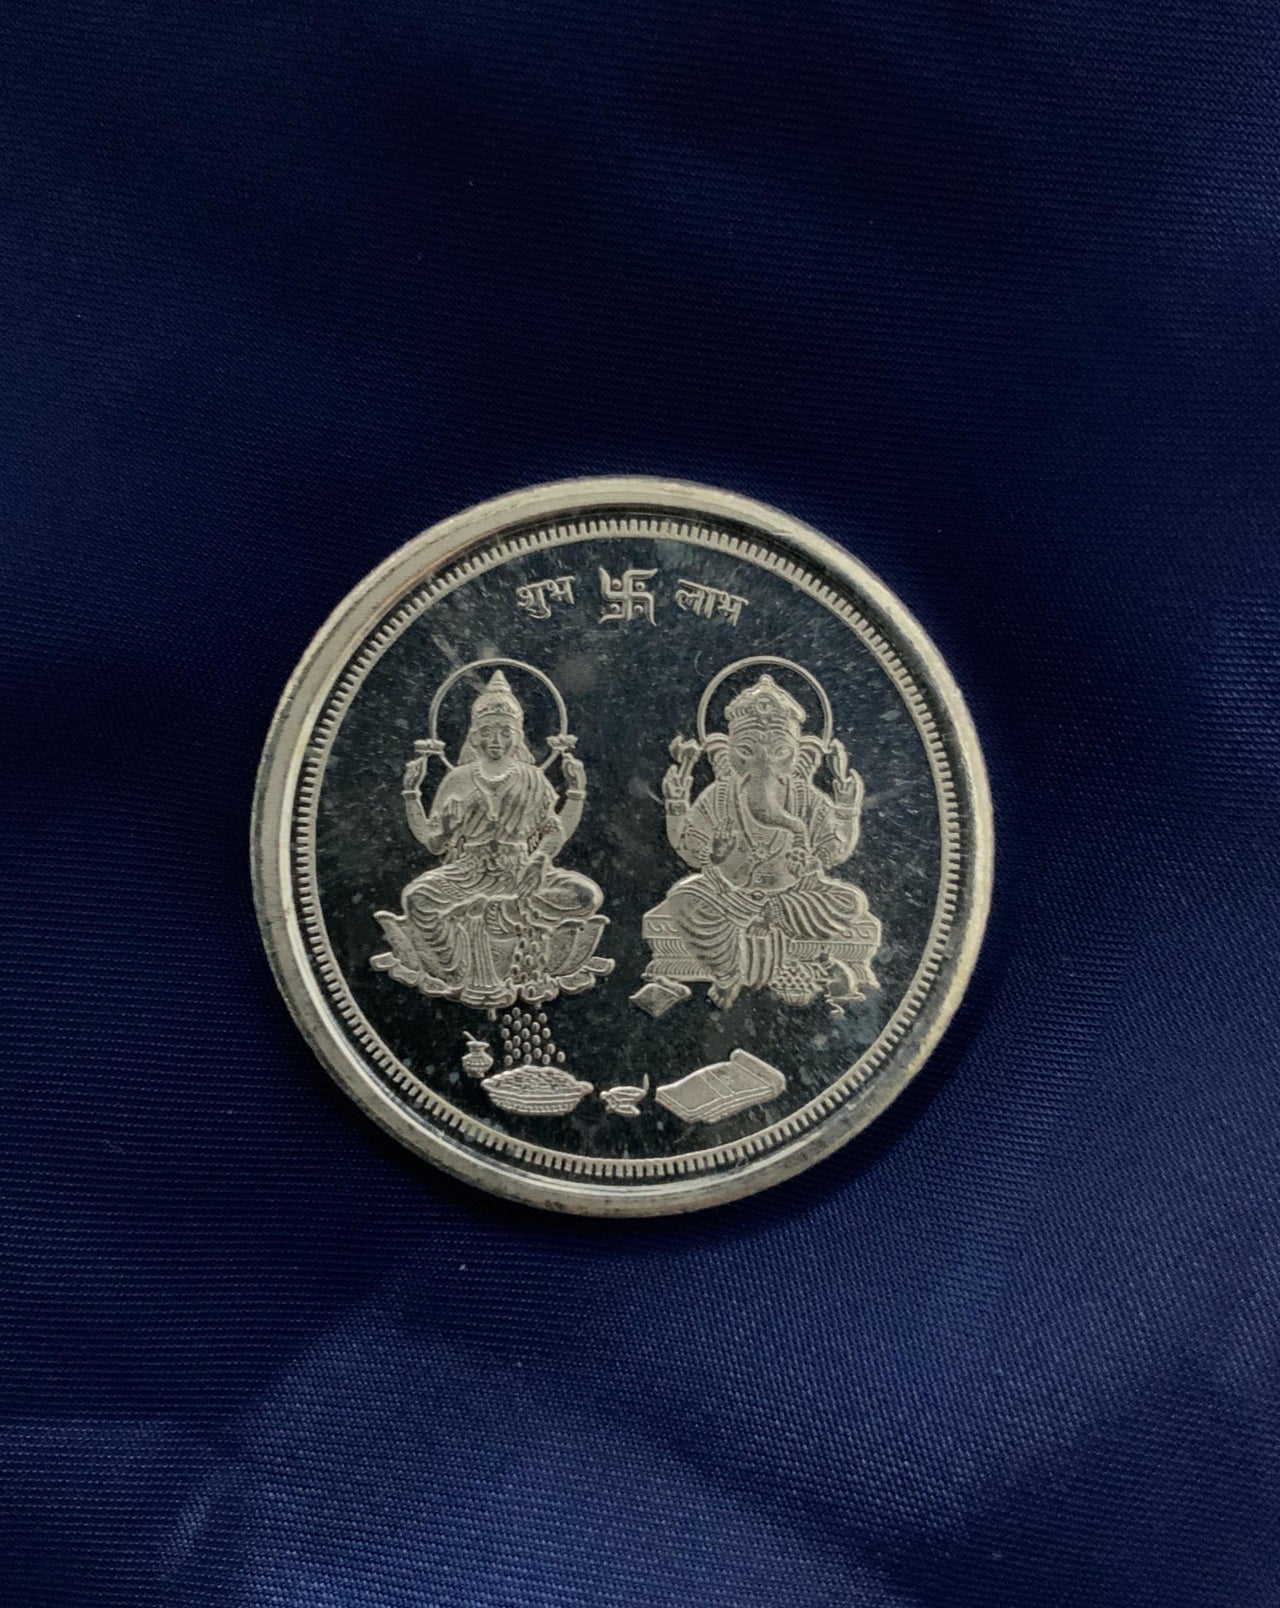 Purest Silver Coins